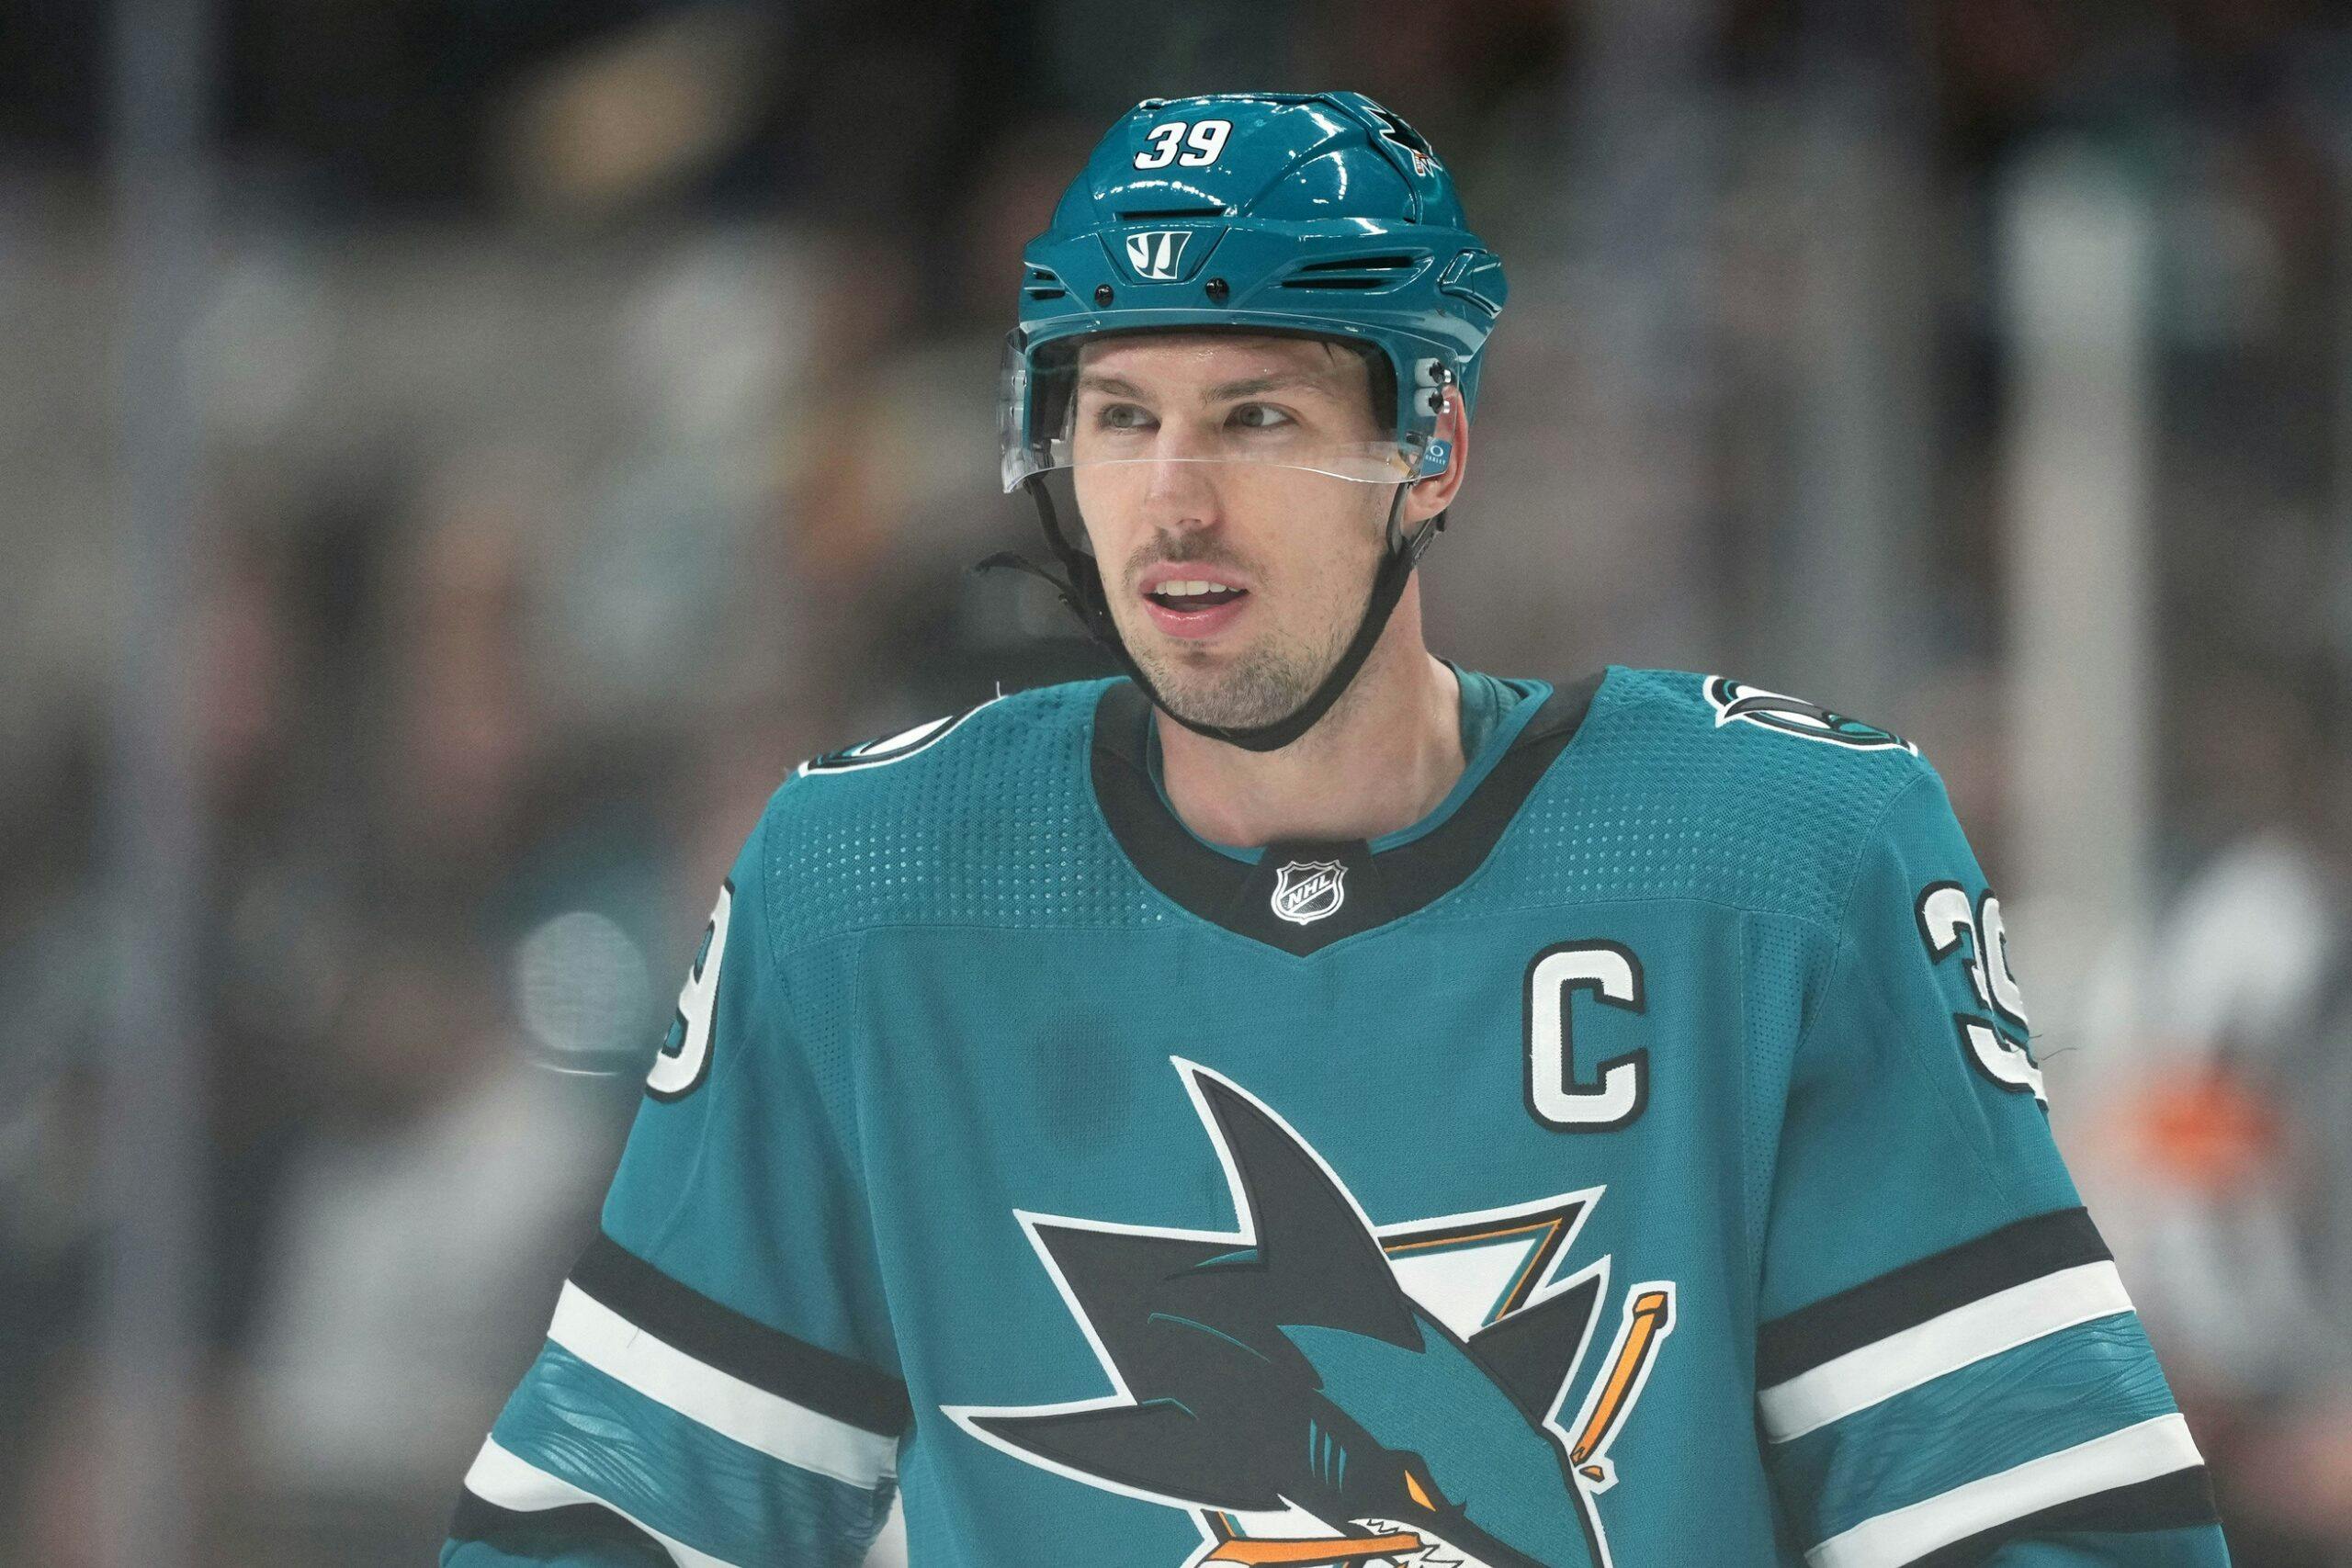 What could happen with Logan Couture once he returns to San Jose Sharks